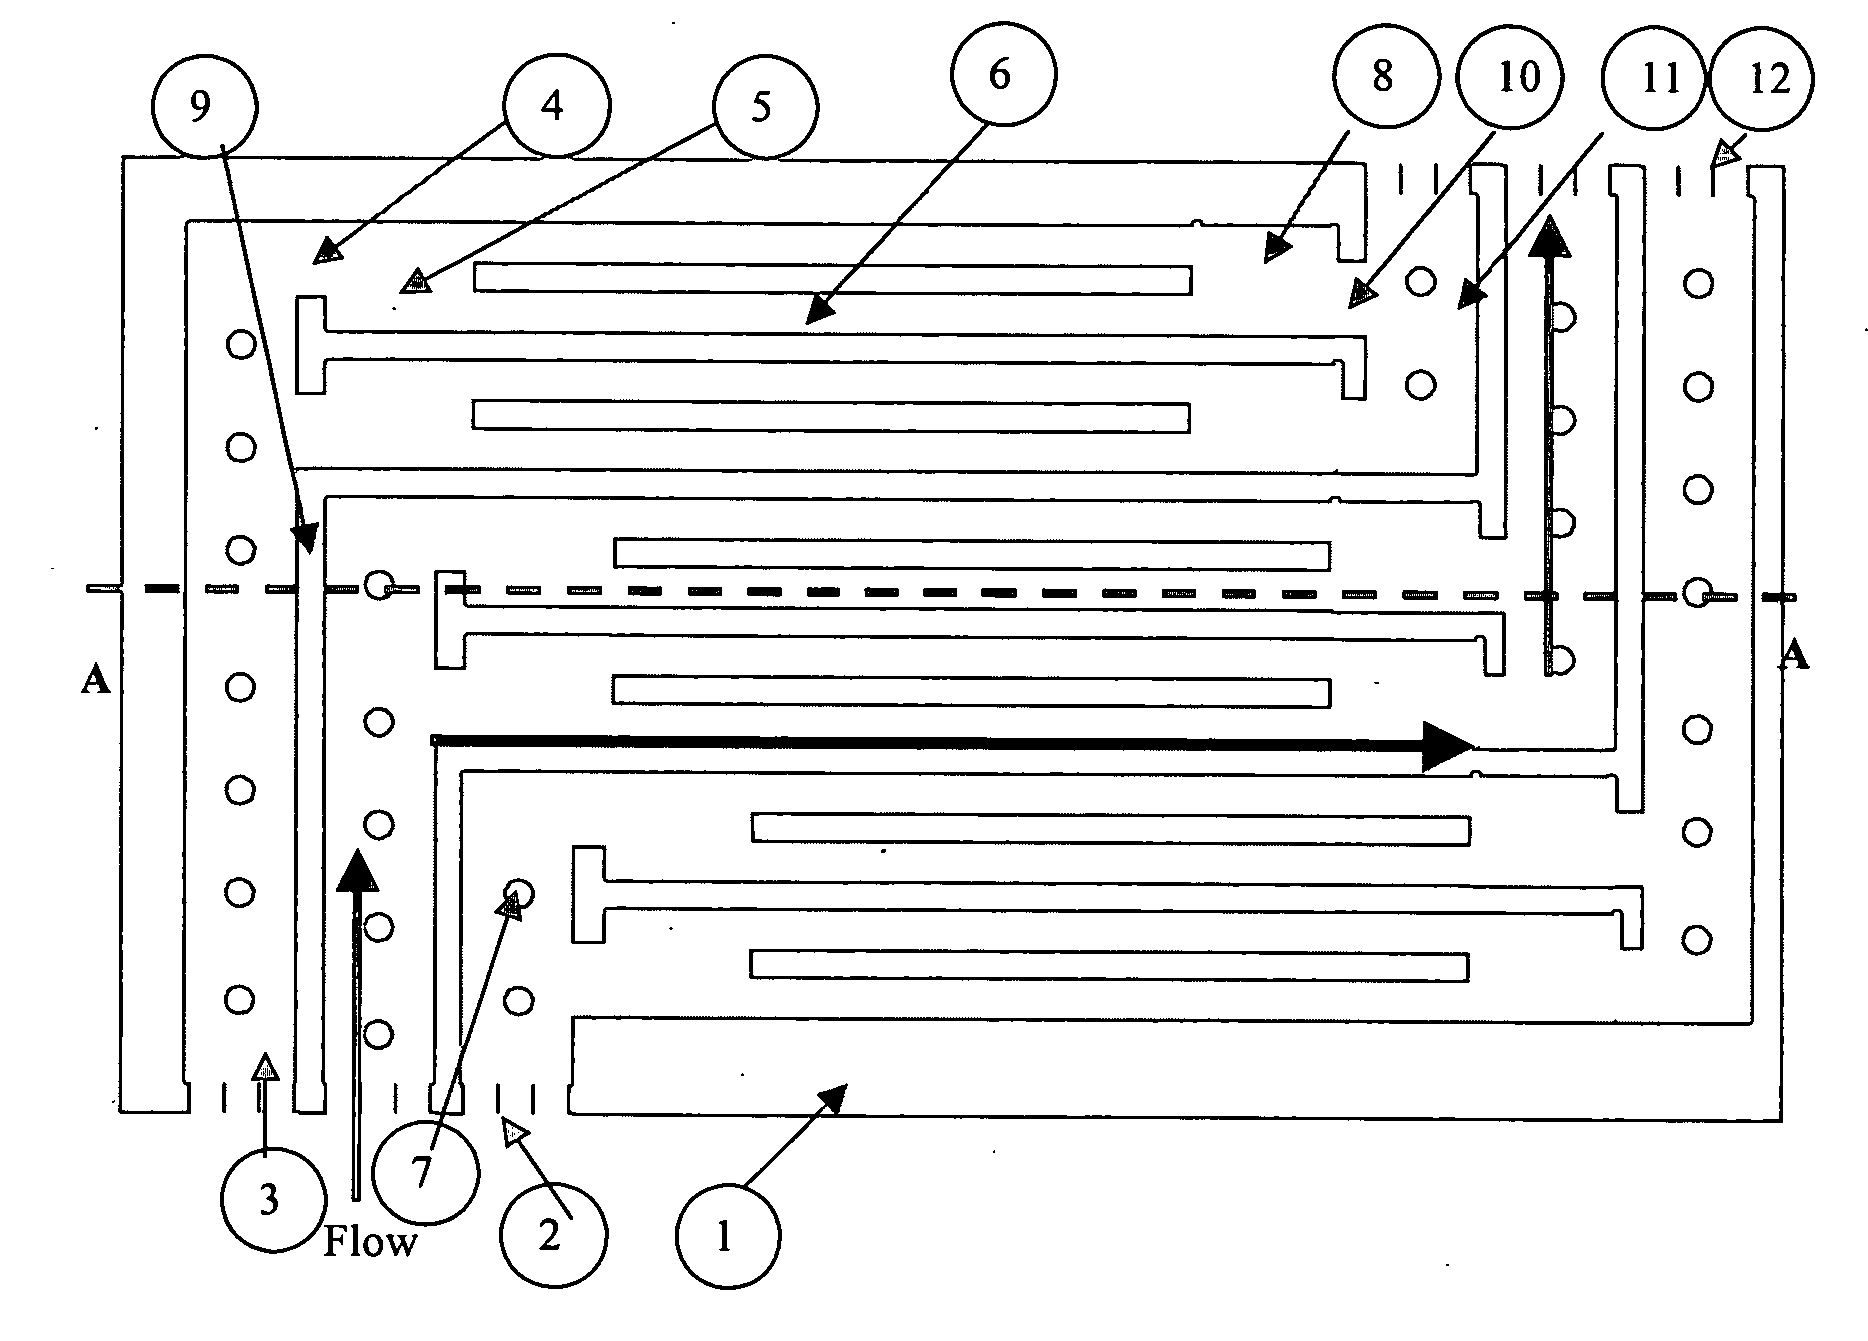 Flow control through plural, parallel connecting channels to/from a manifold